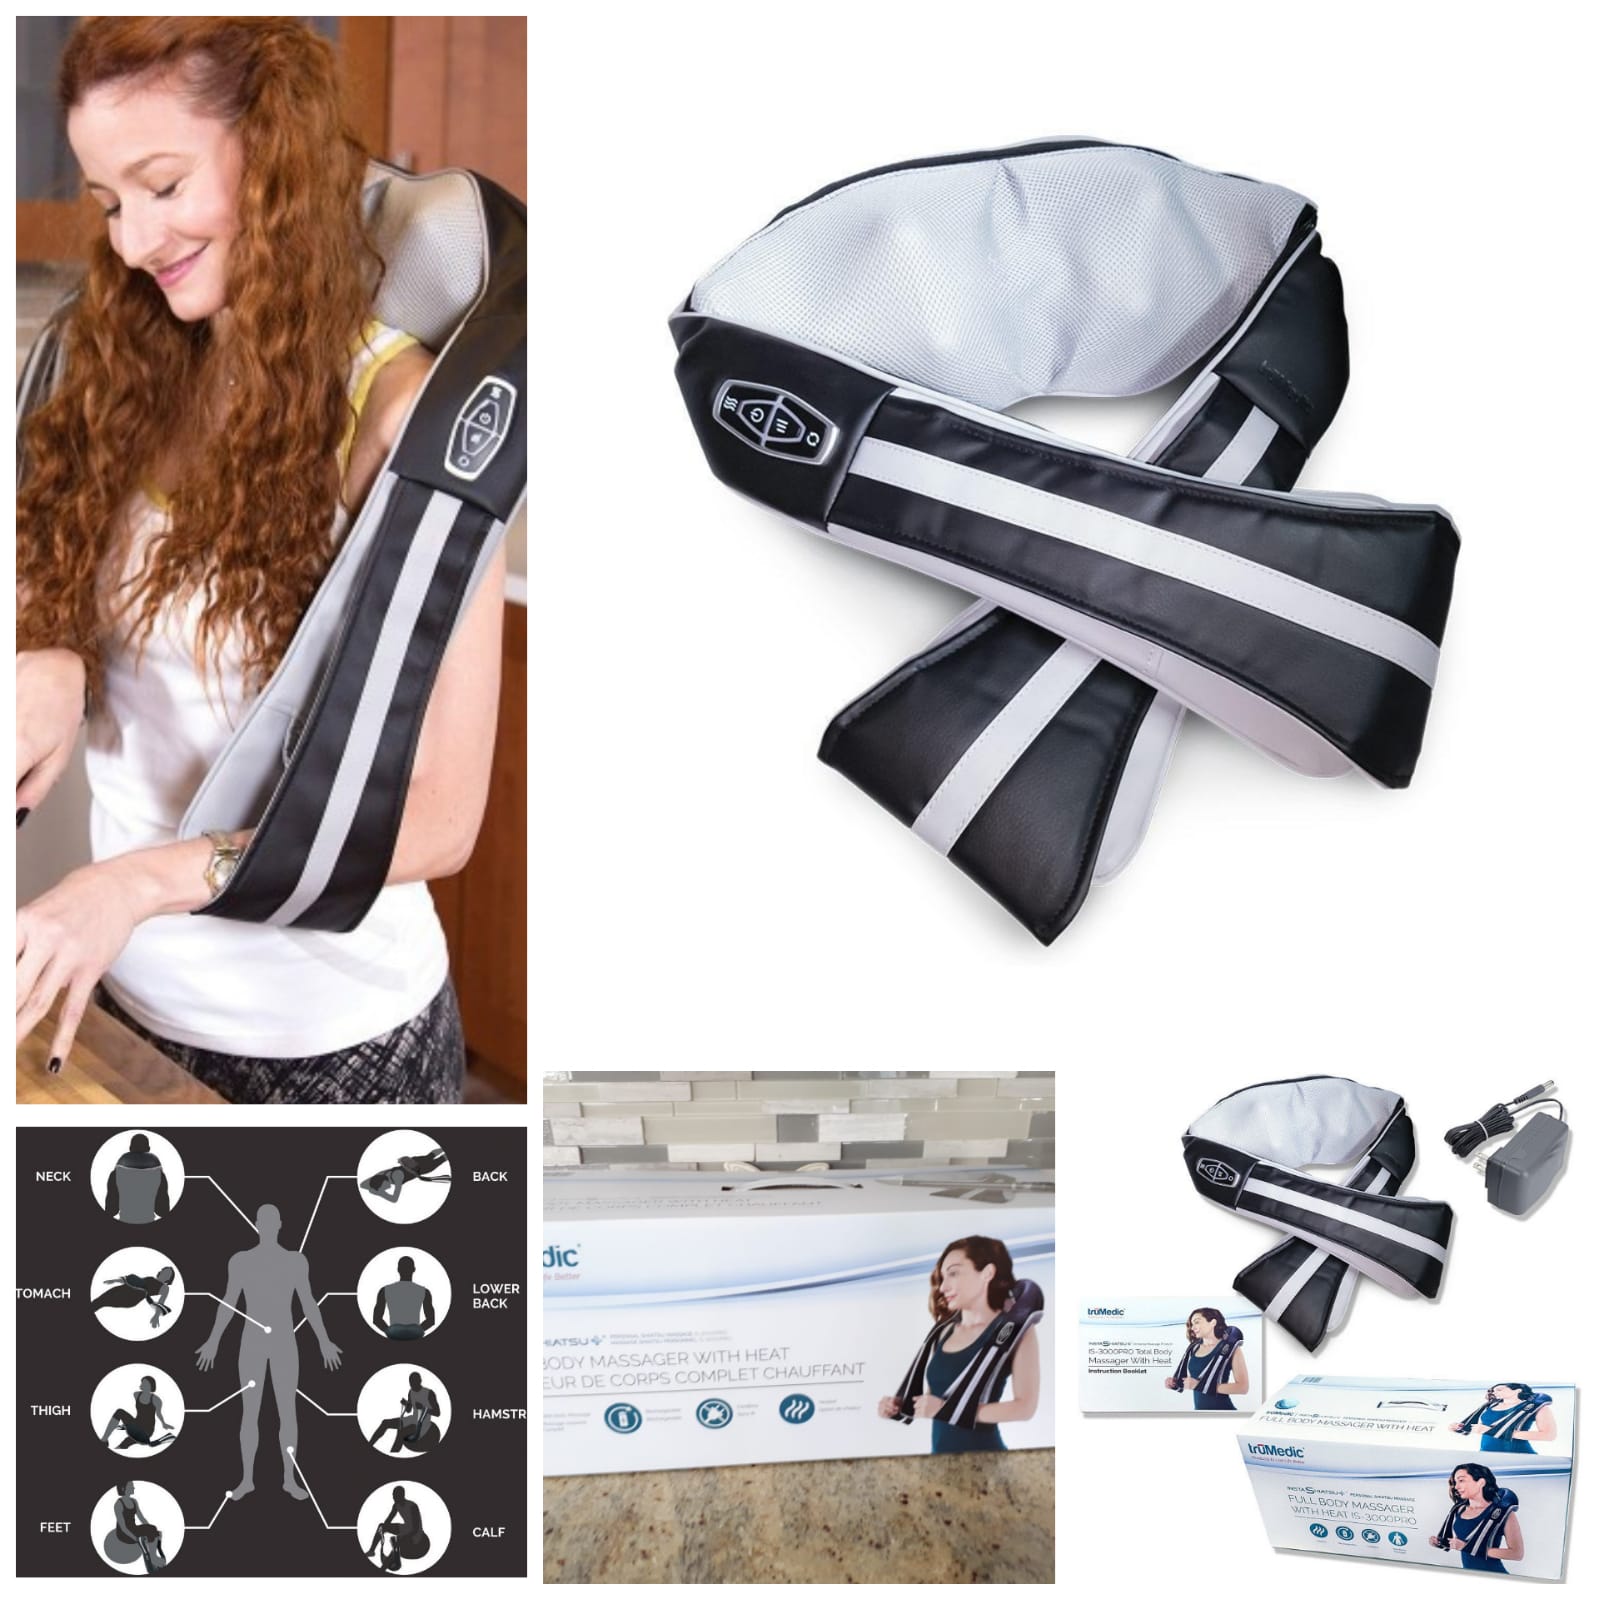 Christmas Sale - truMedic is-3000 PRO Neck Massager with Heat - Cheaper  Than